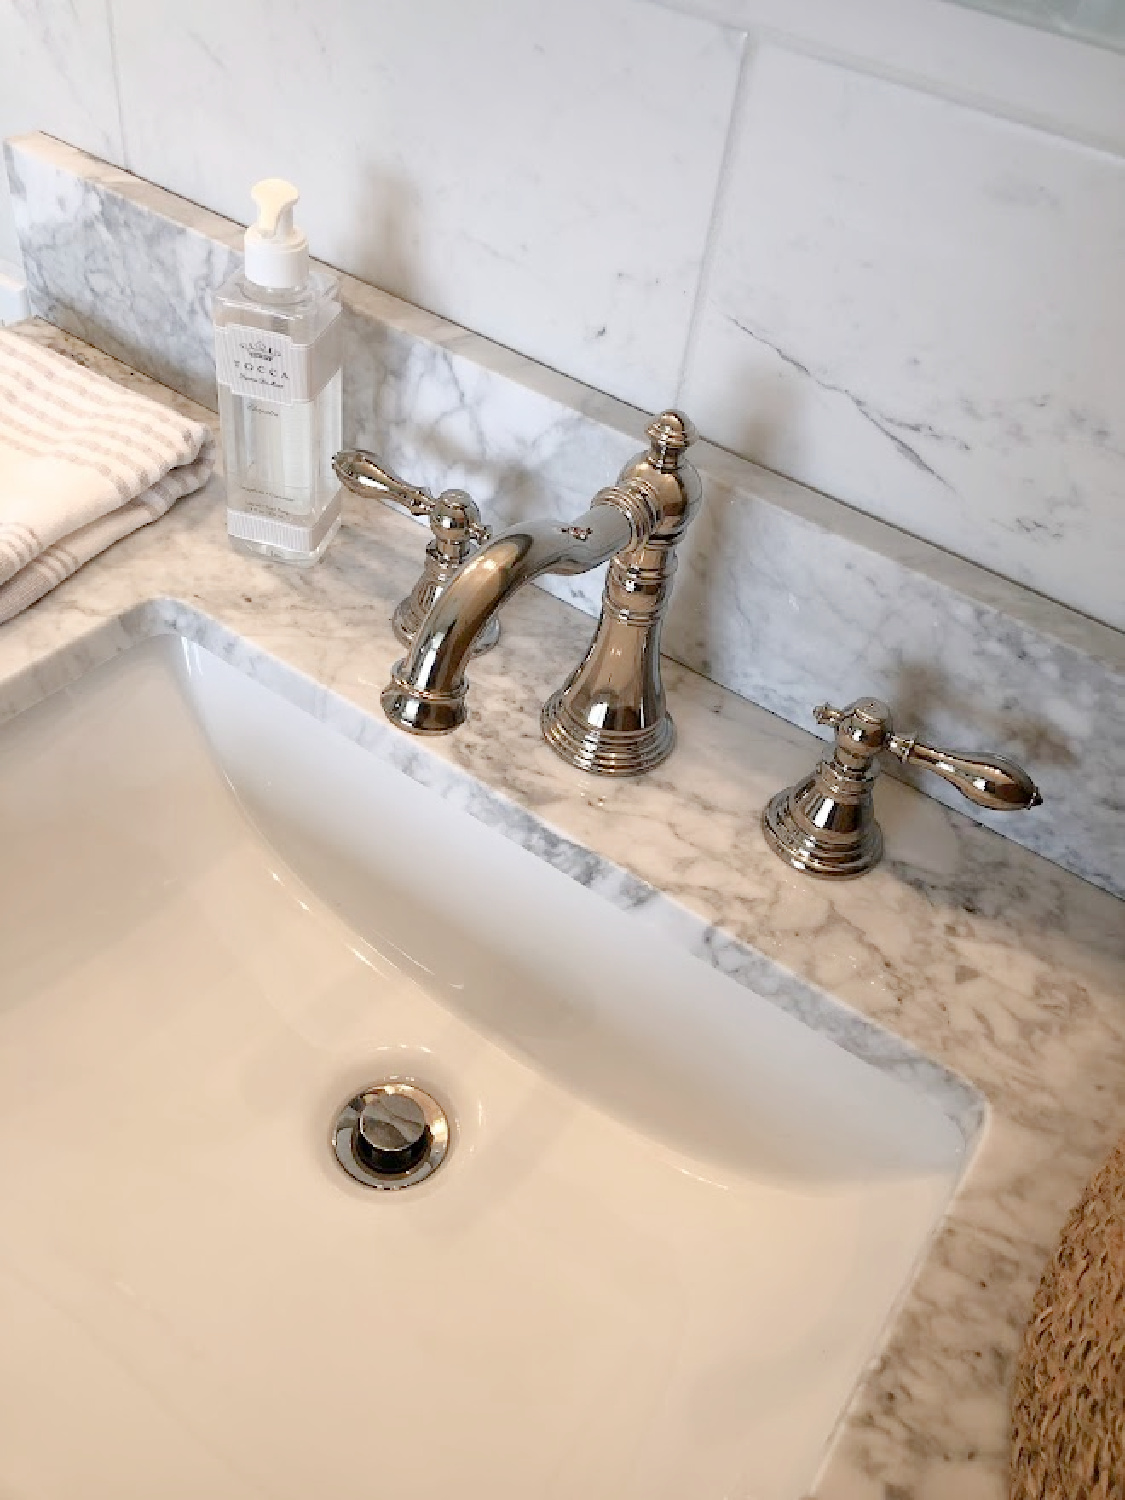 Detail of Edwardian style polished nickel bath faucet and carrera marble vanity top in our renovated bath at the Georgian - Hello Lovely Studio.